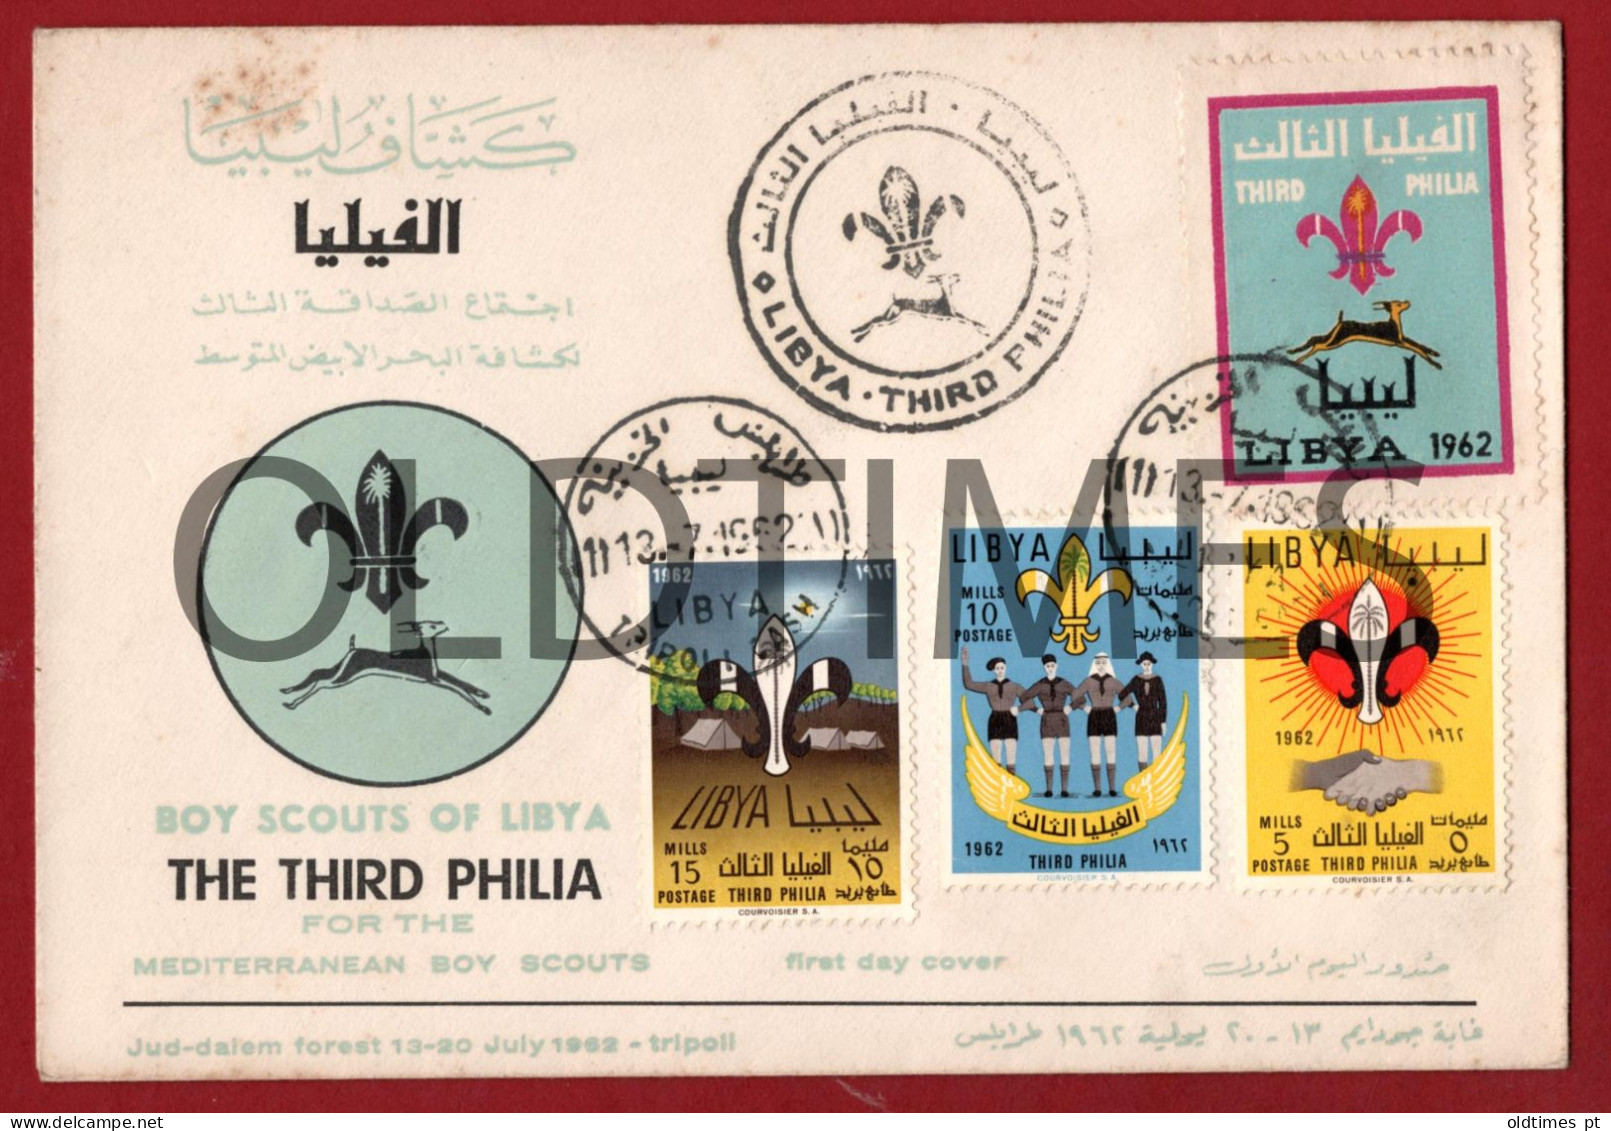 LIBYA - BOY SCOUTS OF LIBYA - THE THIRD PHILIA FOR THE MEDITERRANEAN - FIRST DAY COVER - 1962 ENVELOPE - Pfadfinder-Bewegung